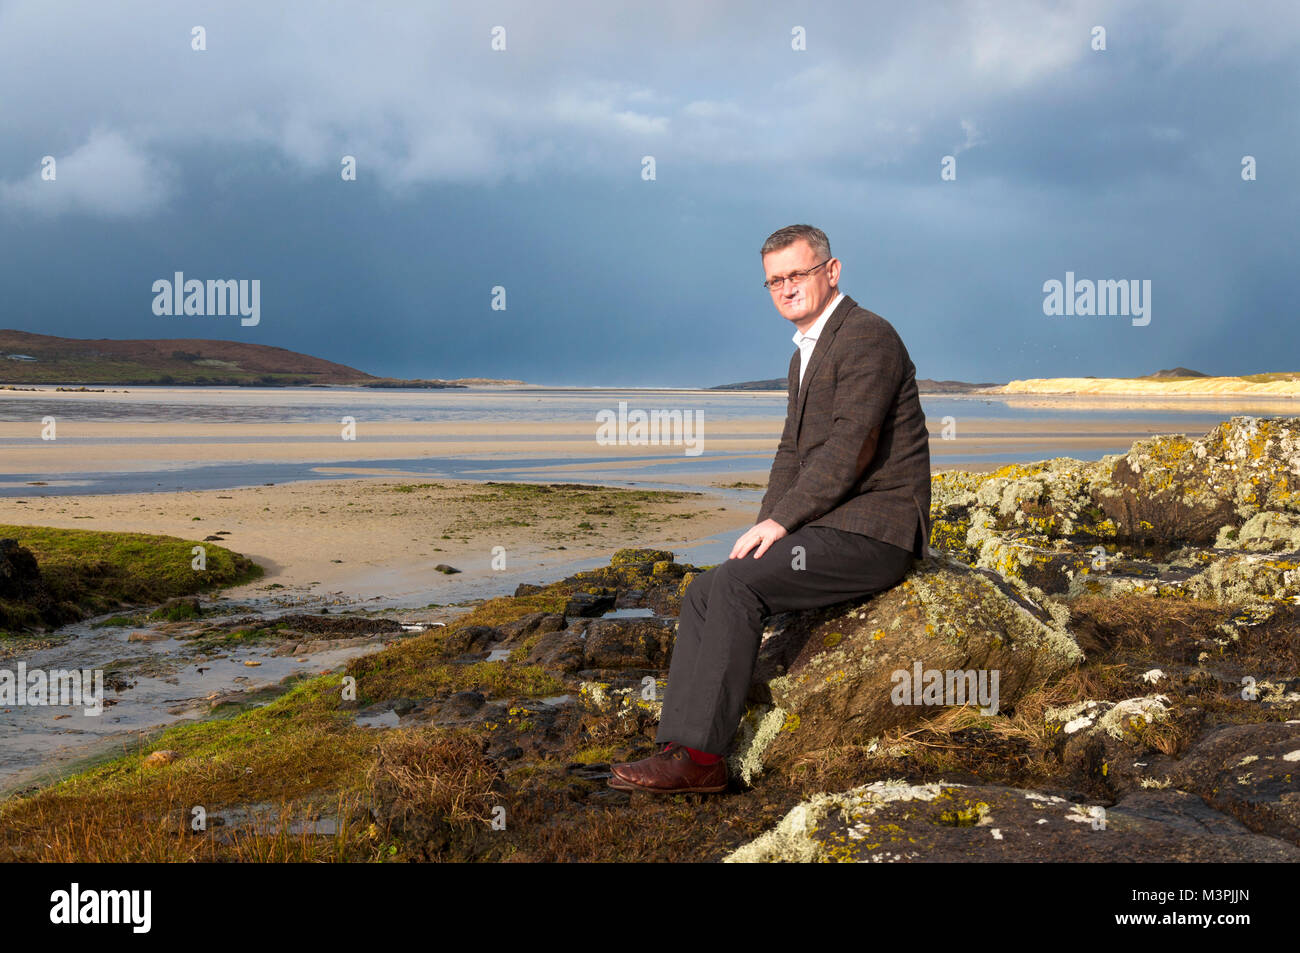 Ardara, County Donegal, Ireland. 12th February 2018. Dr Breandán Mac Suibhne, historian and author. His most recent book, 'The End of Outrage: Post-Famine Adjustment in Rural Ireland', was the Irish Times ‘Irish Non-Fiction Book of the Year’ in 2017. The book is set in and around his home town here in Ardara. Credit: Richard Wayman/Alamy Live News Stock Photo